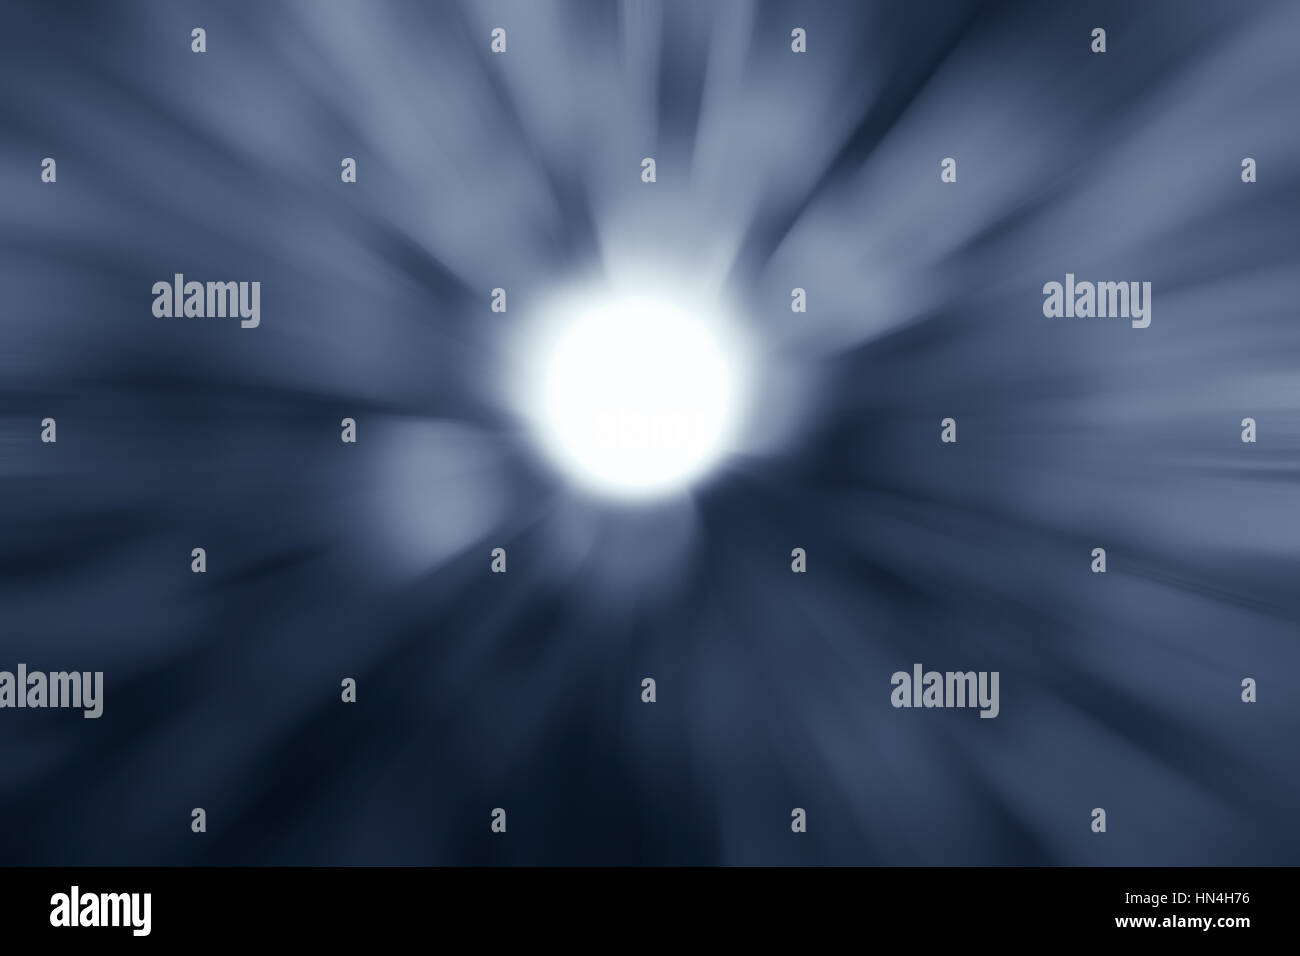 Way out move light hole flare, Acceleration super fast speed motion background for design. Stock Photo